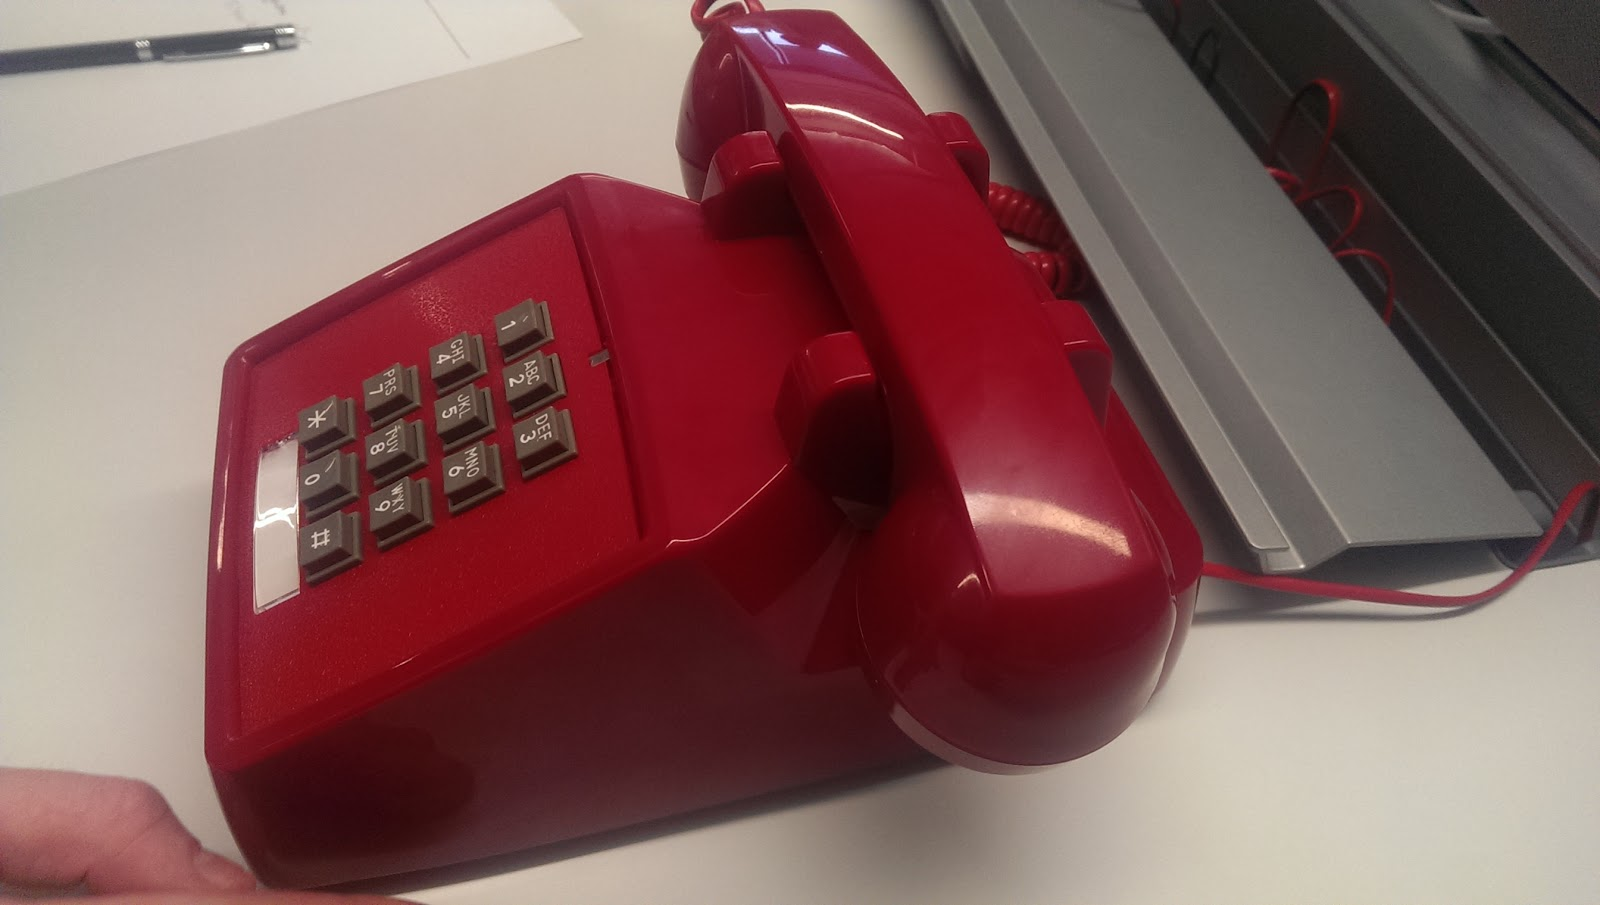 Picture of retro red phone